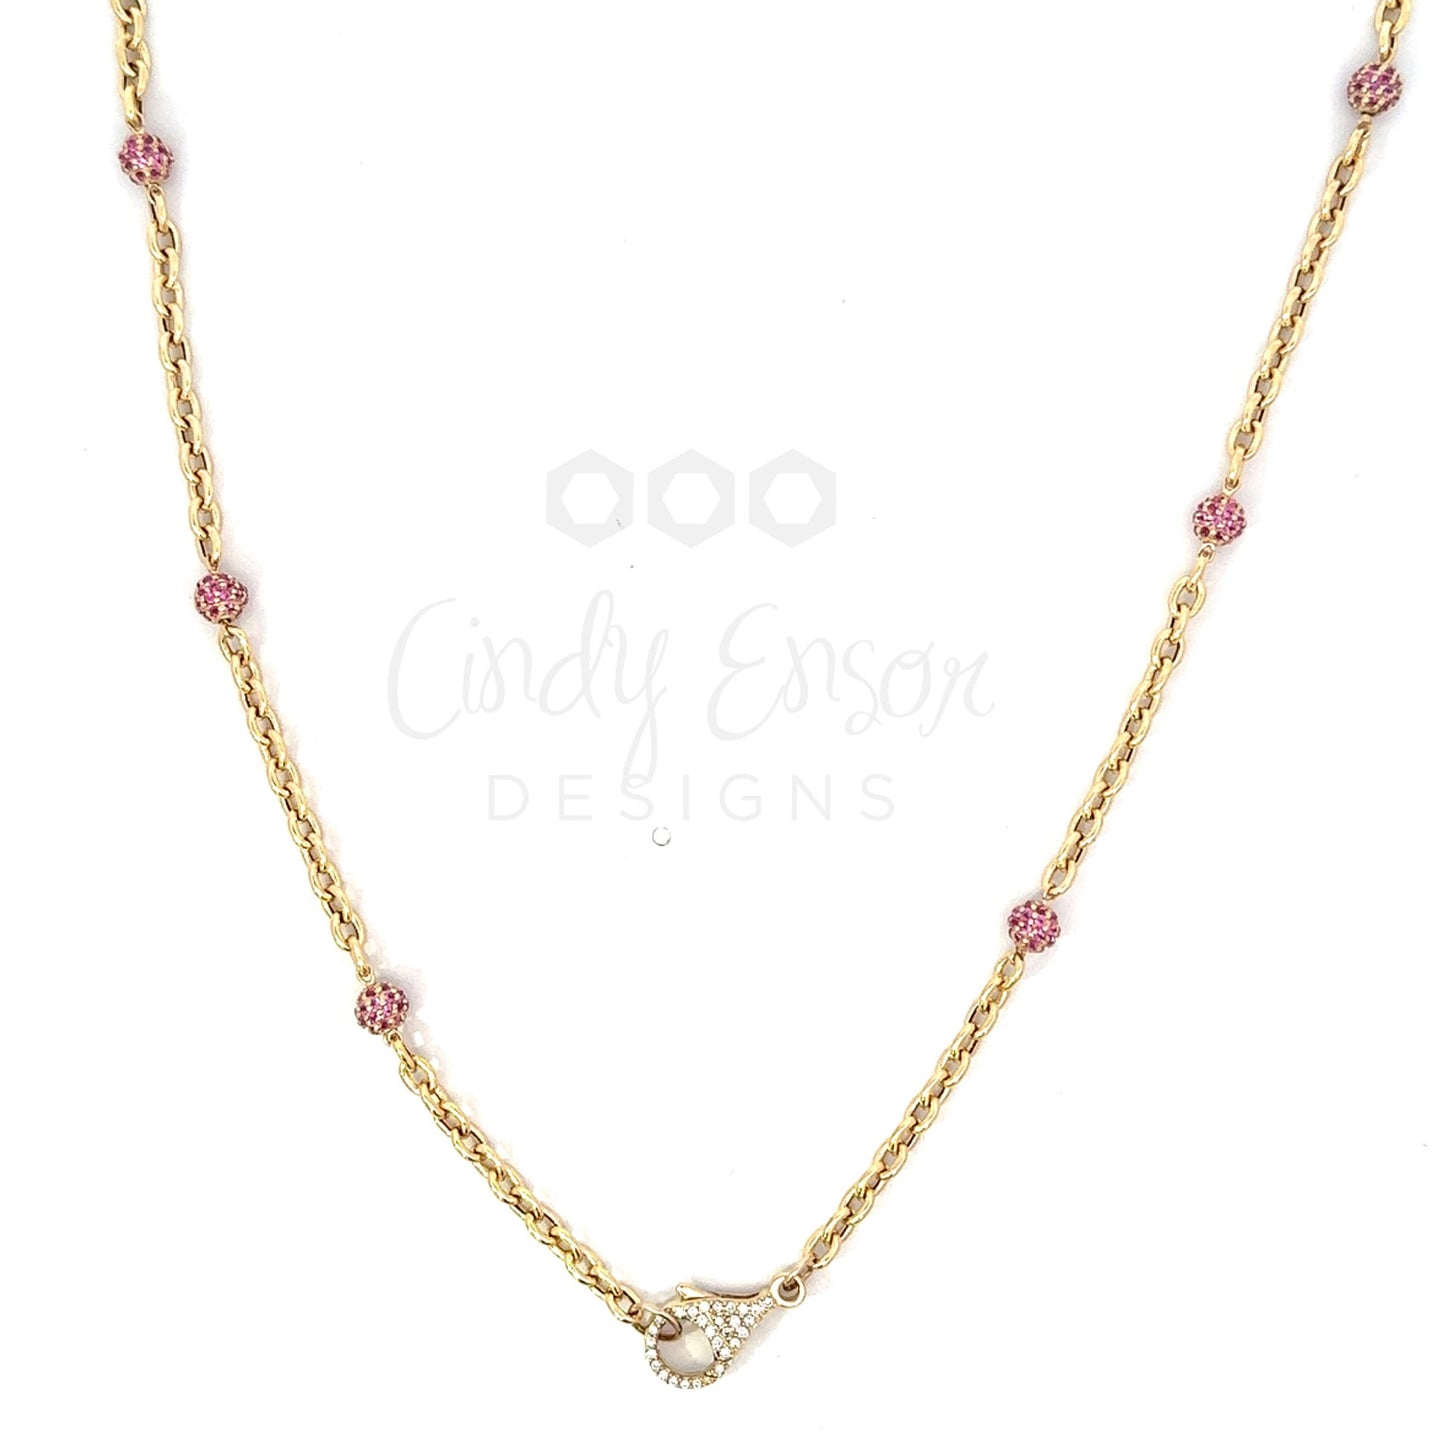 Yellow Gold Oval Link Necklace with Ruby Bead Accents and Tiny Pave Lobster